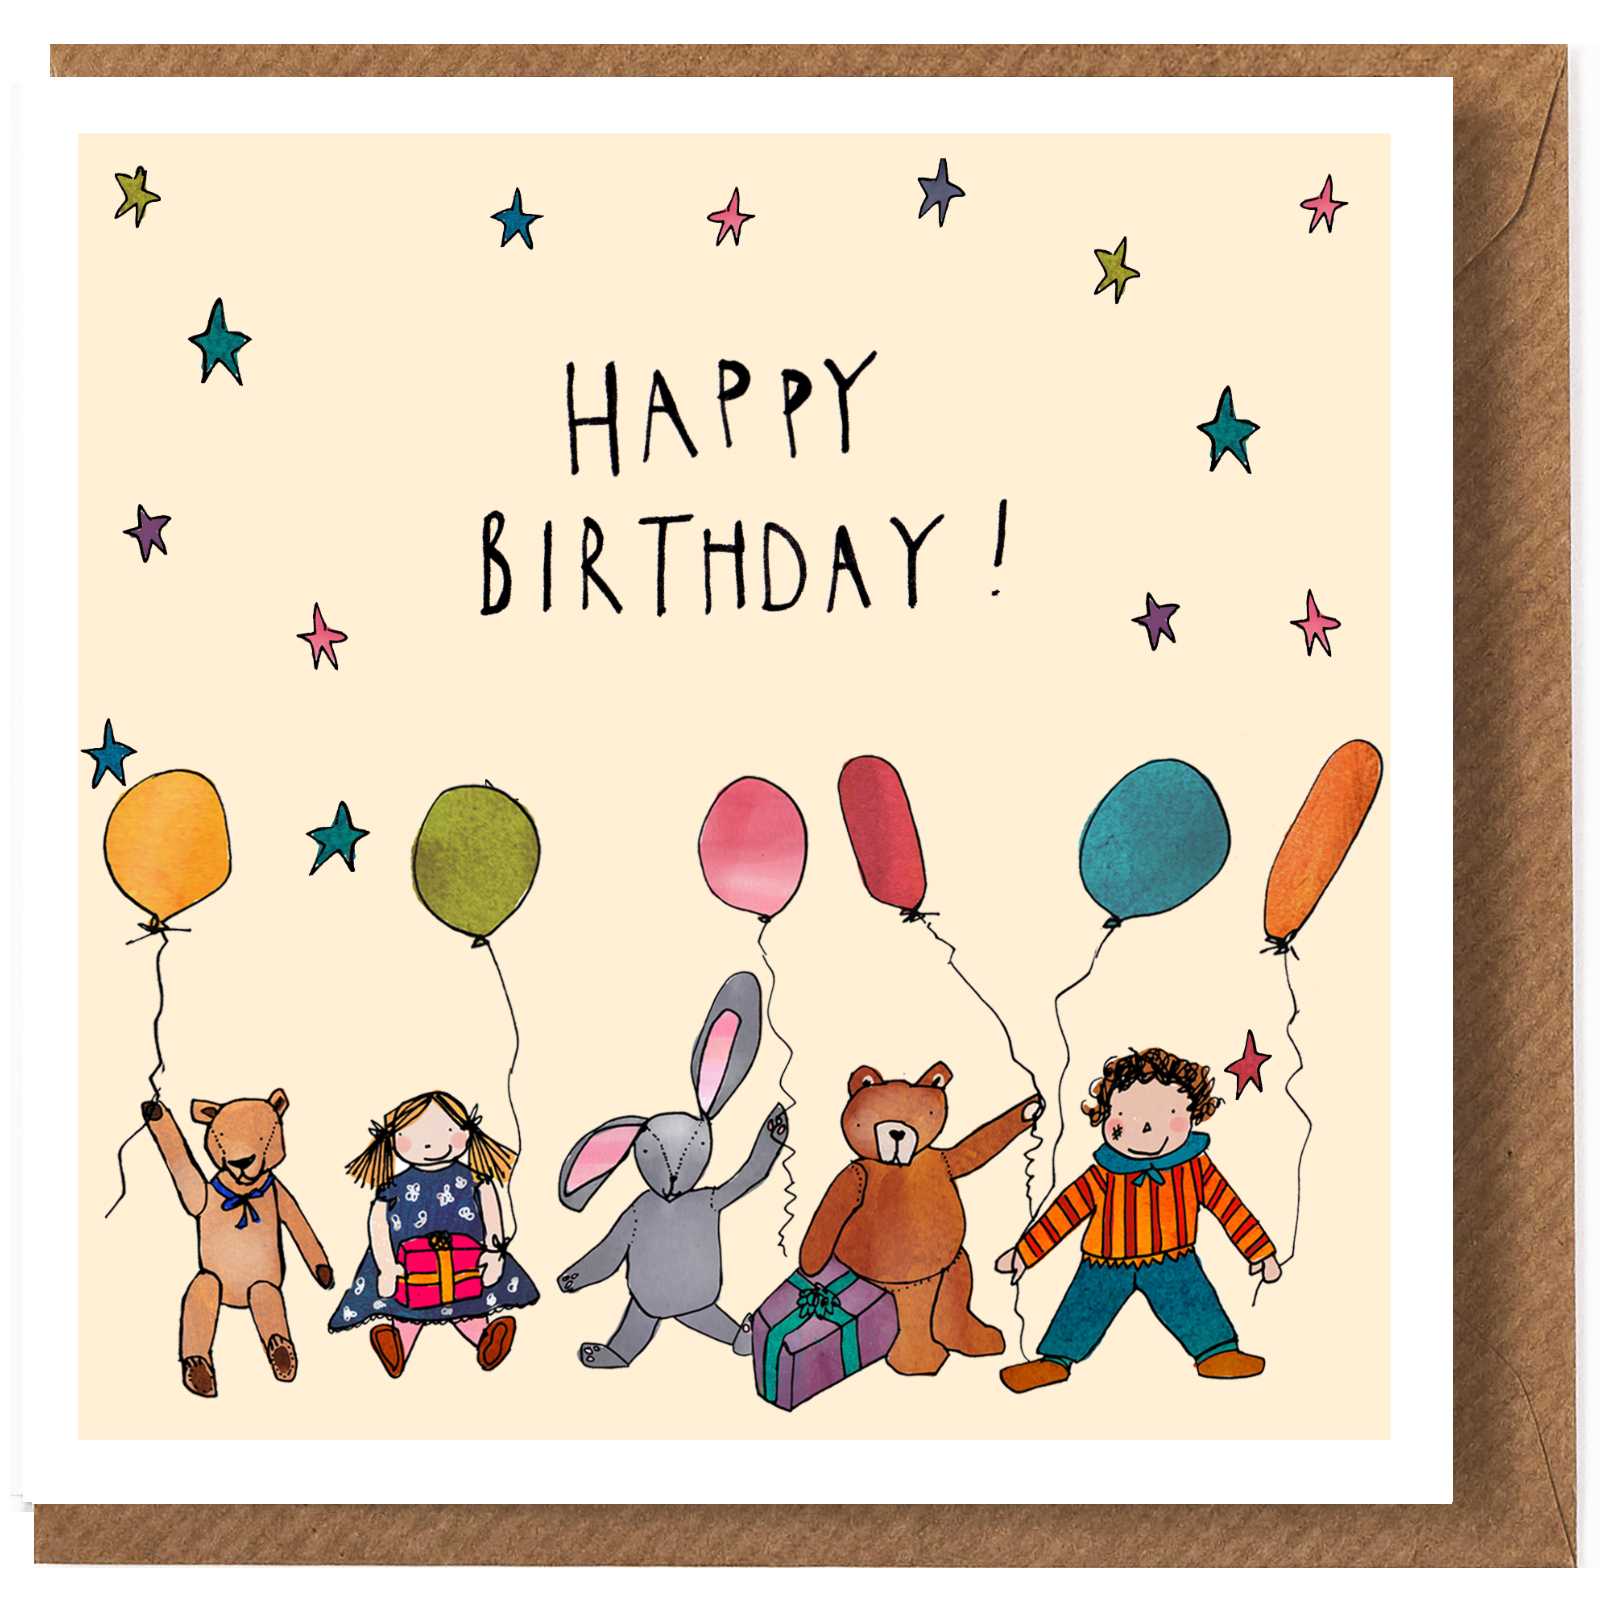 happy birthday kids images        <h3 class=